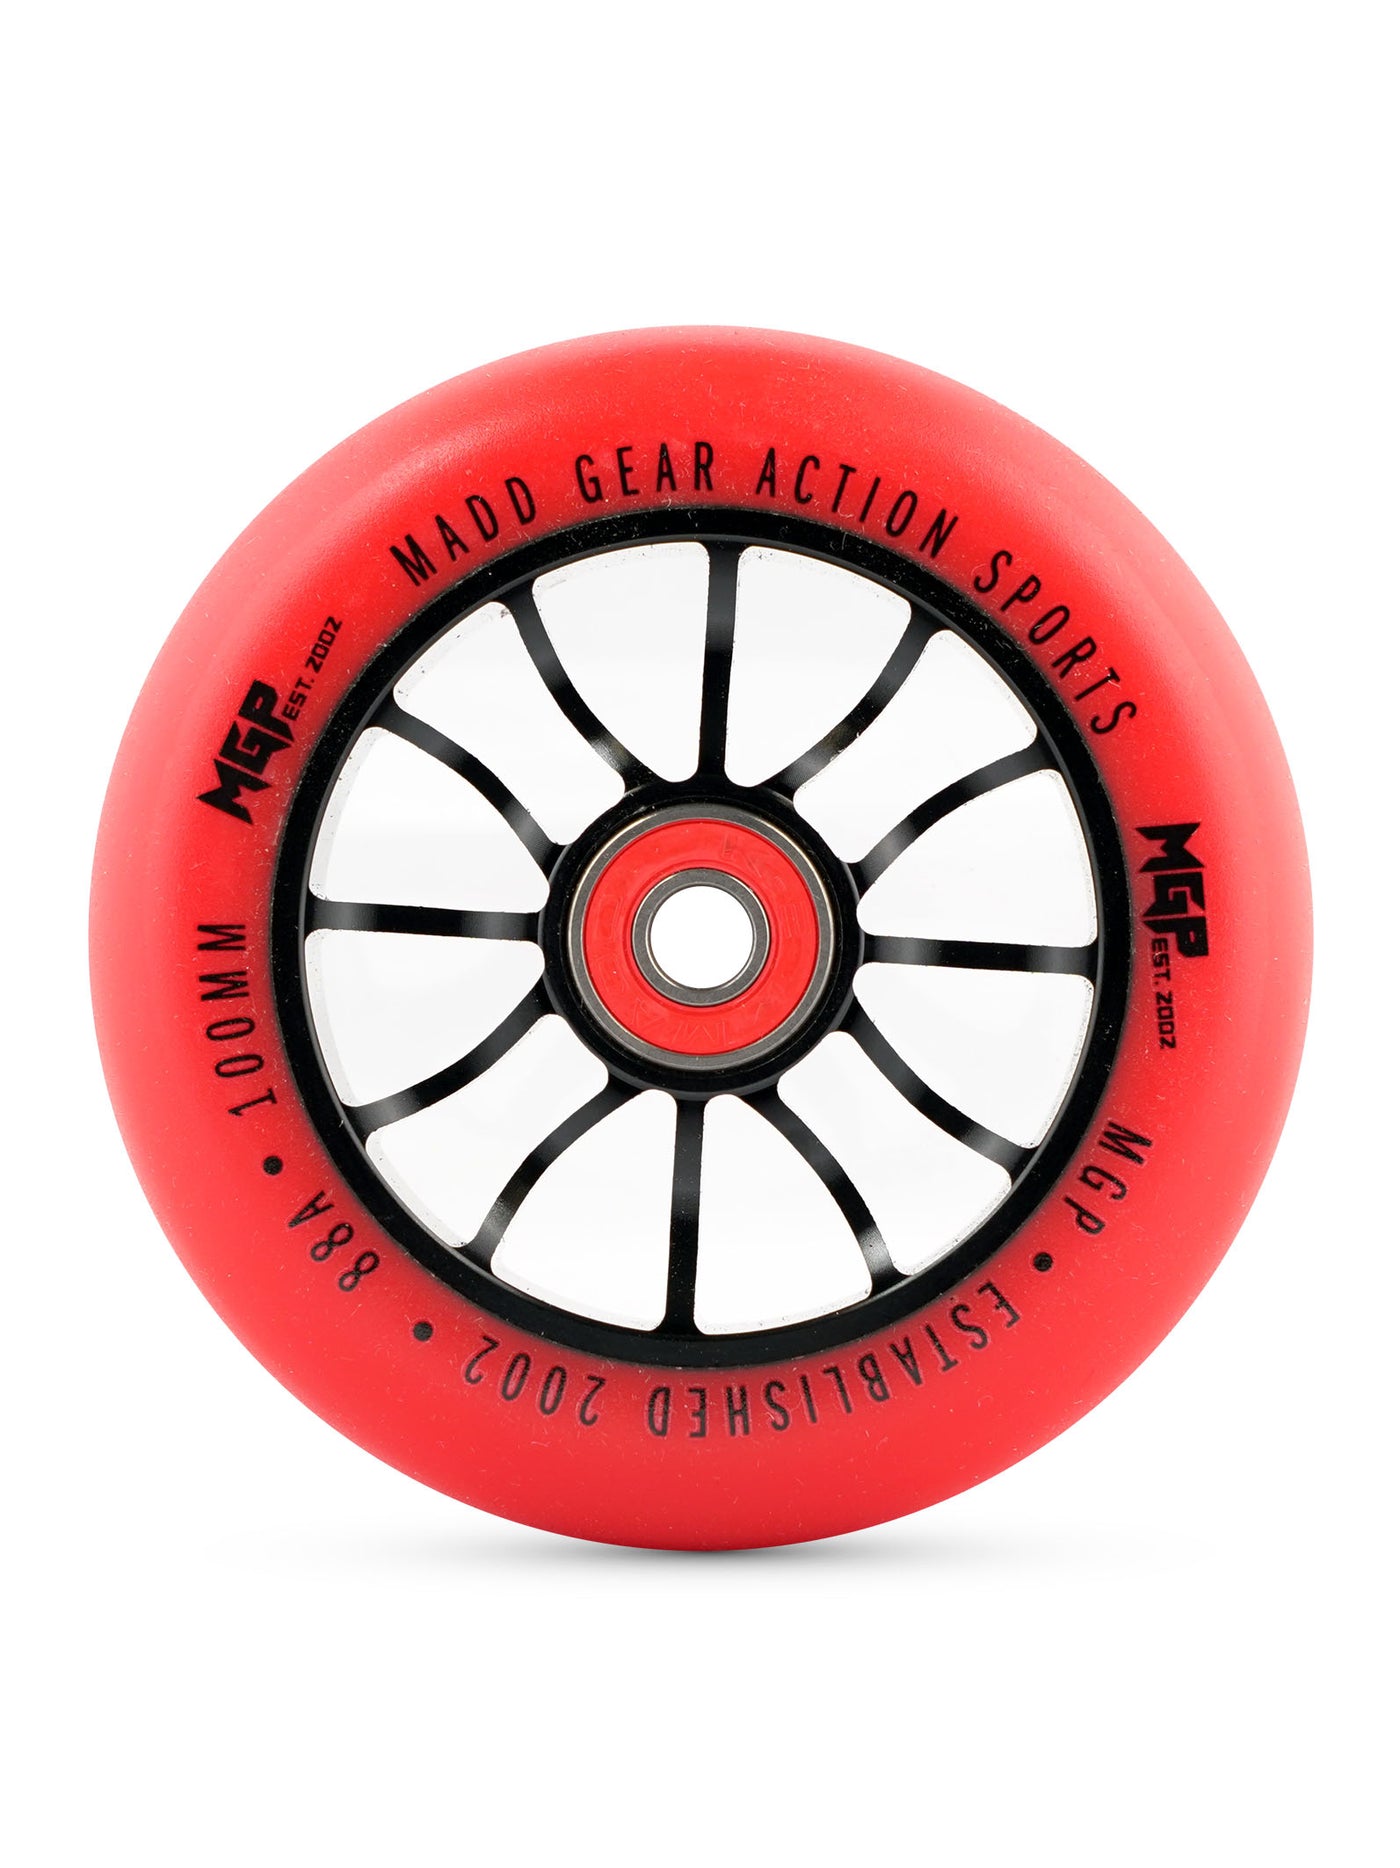 mgp mfx madd gear origin 100mm pro scooter wheel replacement part red black alloy metal core